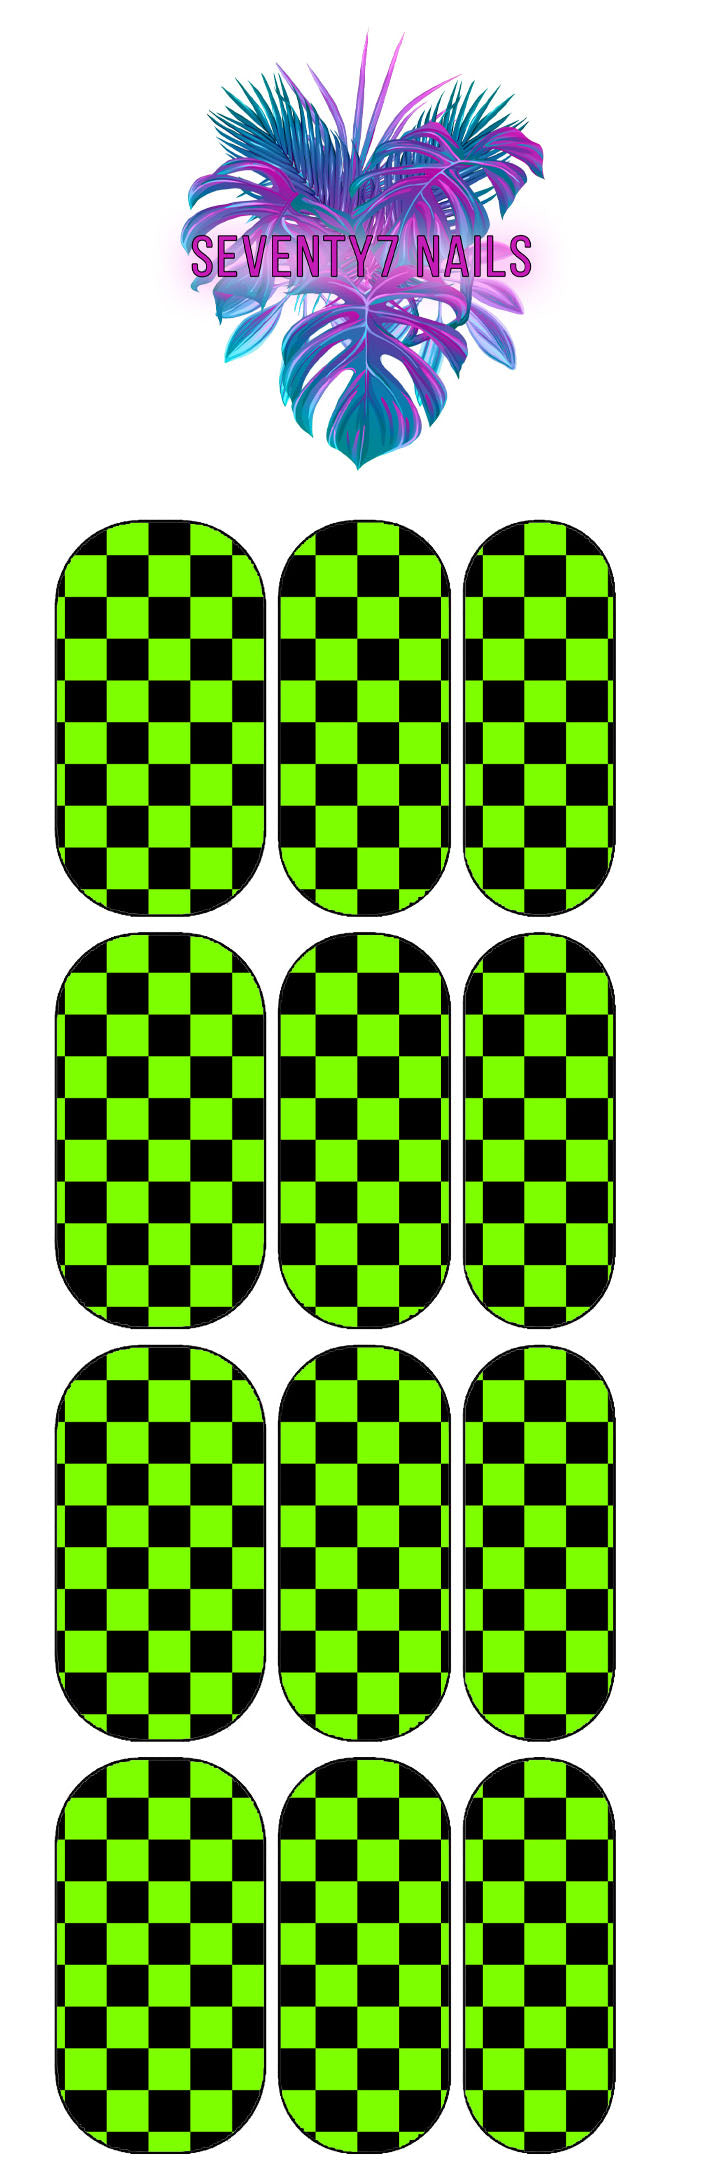 Waterslide Nail Decals - Checkered Lime Green